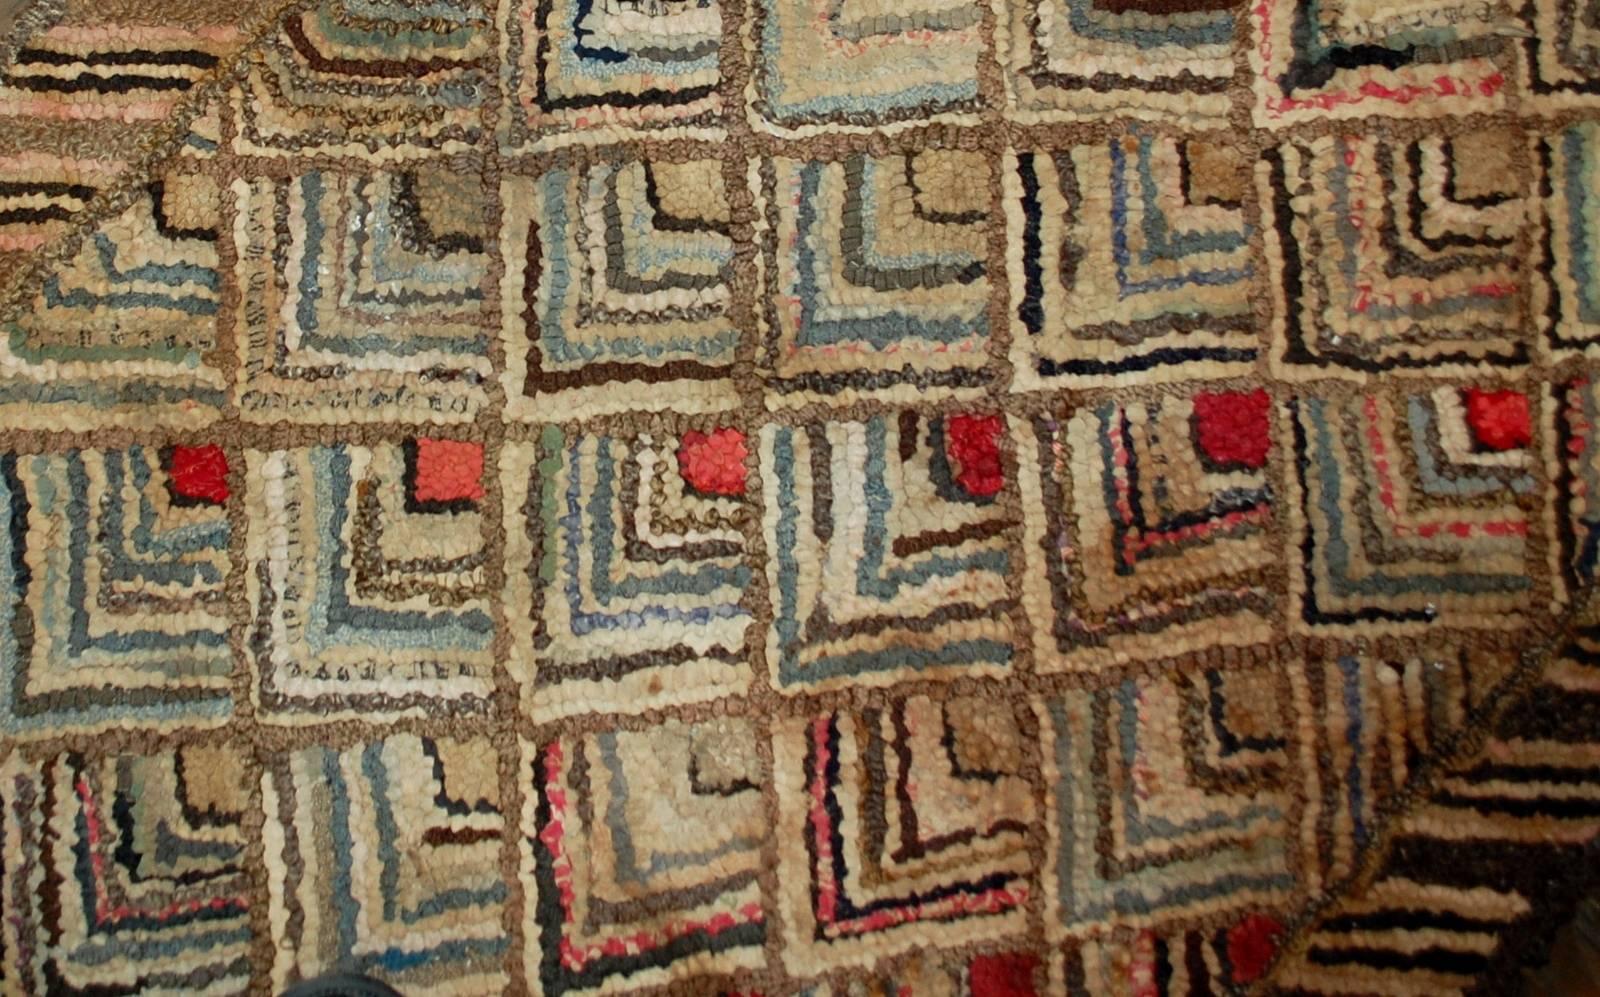 Handmade antique geometric American hooked rug in original good condition. The rug made in repeating arrowhead shaped pattern. Varity of colors are on it: brown, blue, red, beige shades. Beautiful stripped border surrounding the central area. The